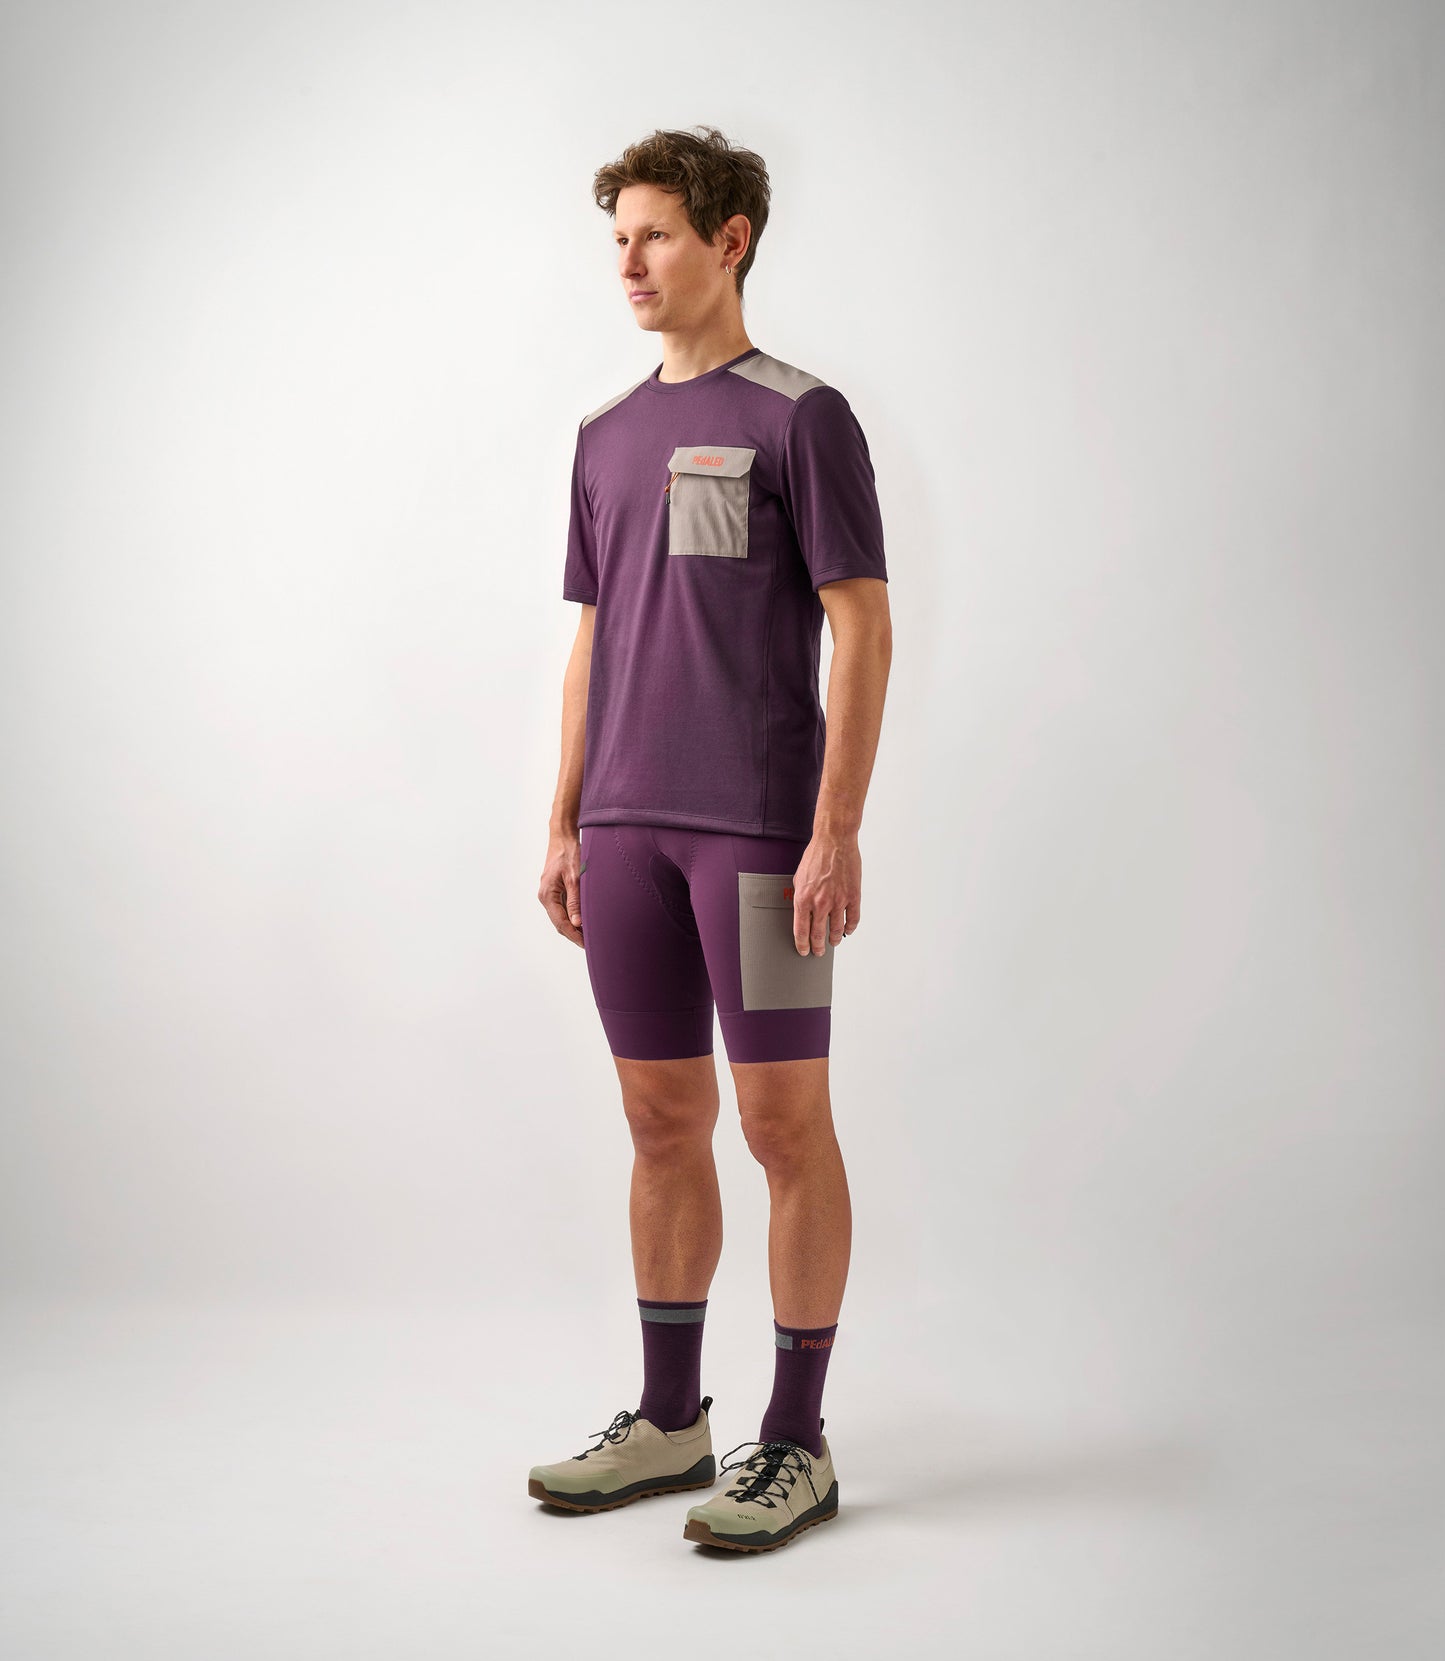 23SMTOD10PE_3_men cycling merino tee purple odyssey total body front pedaled